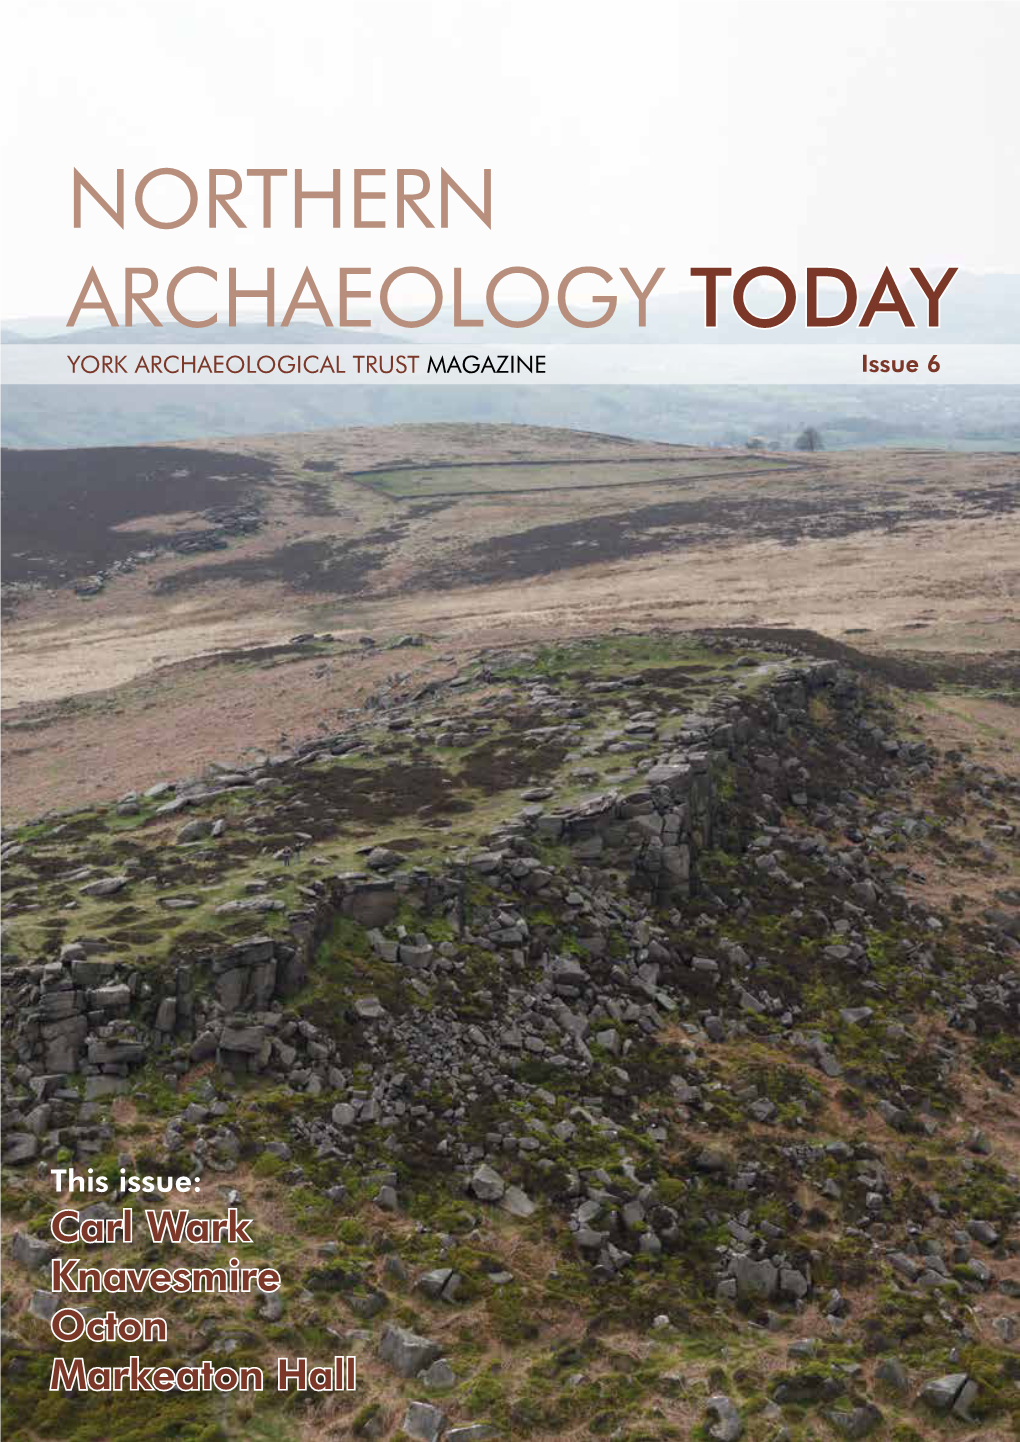 NORTHERN ARCHAEOLOGY TODAY YORK ARCHAEOLOGICAL TRUST MAGAZINE Issue 6